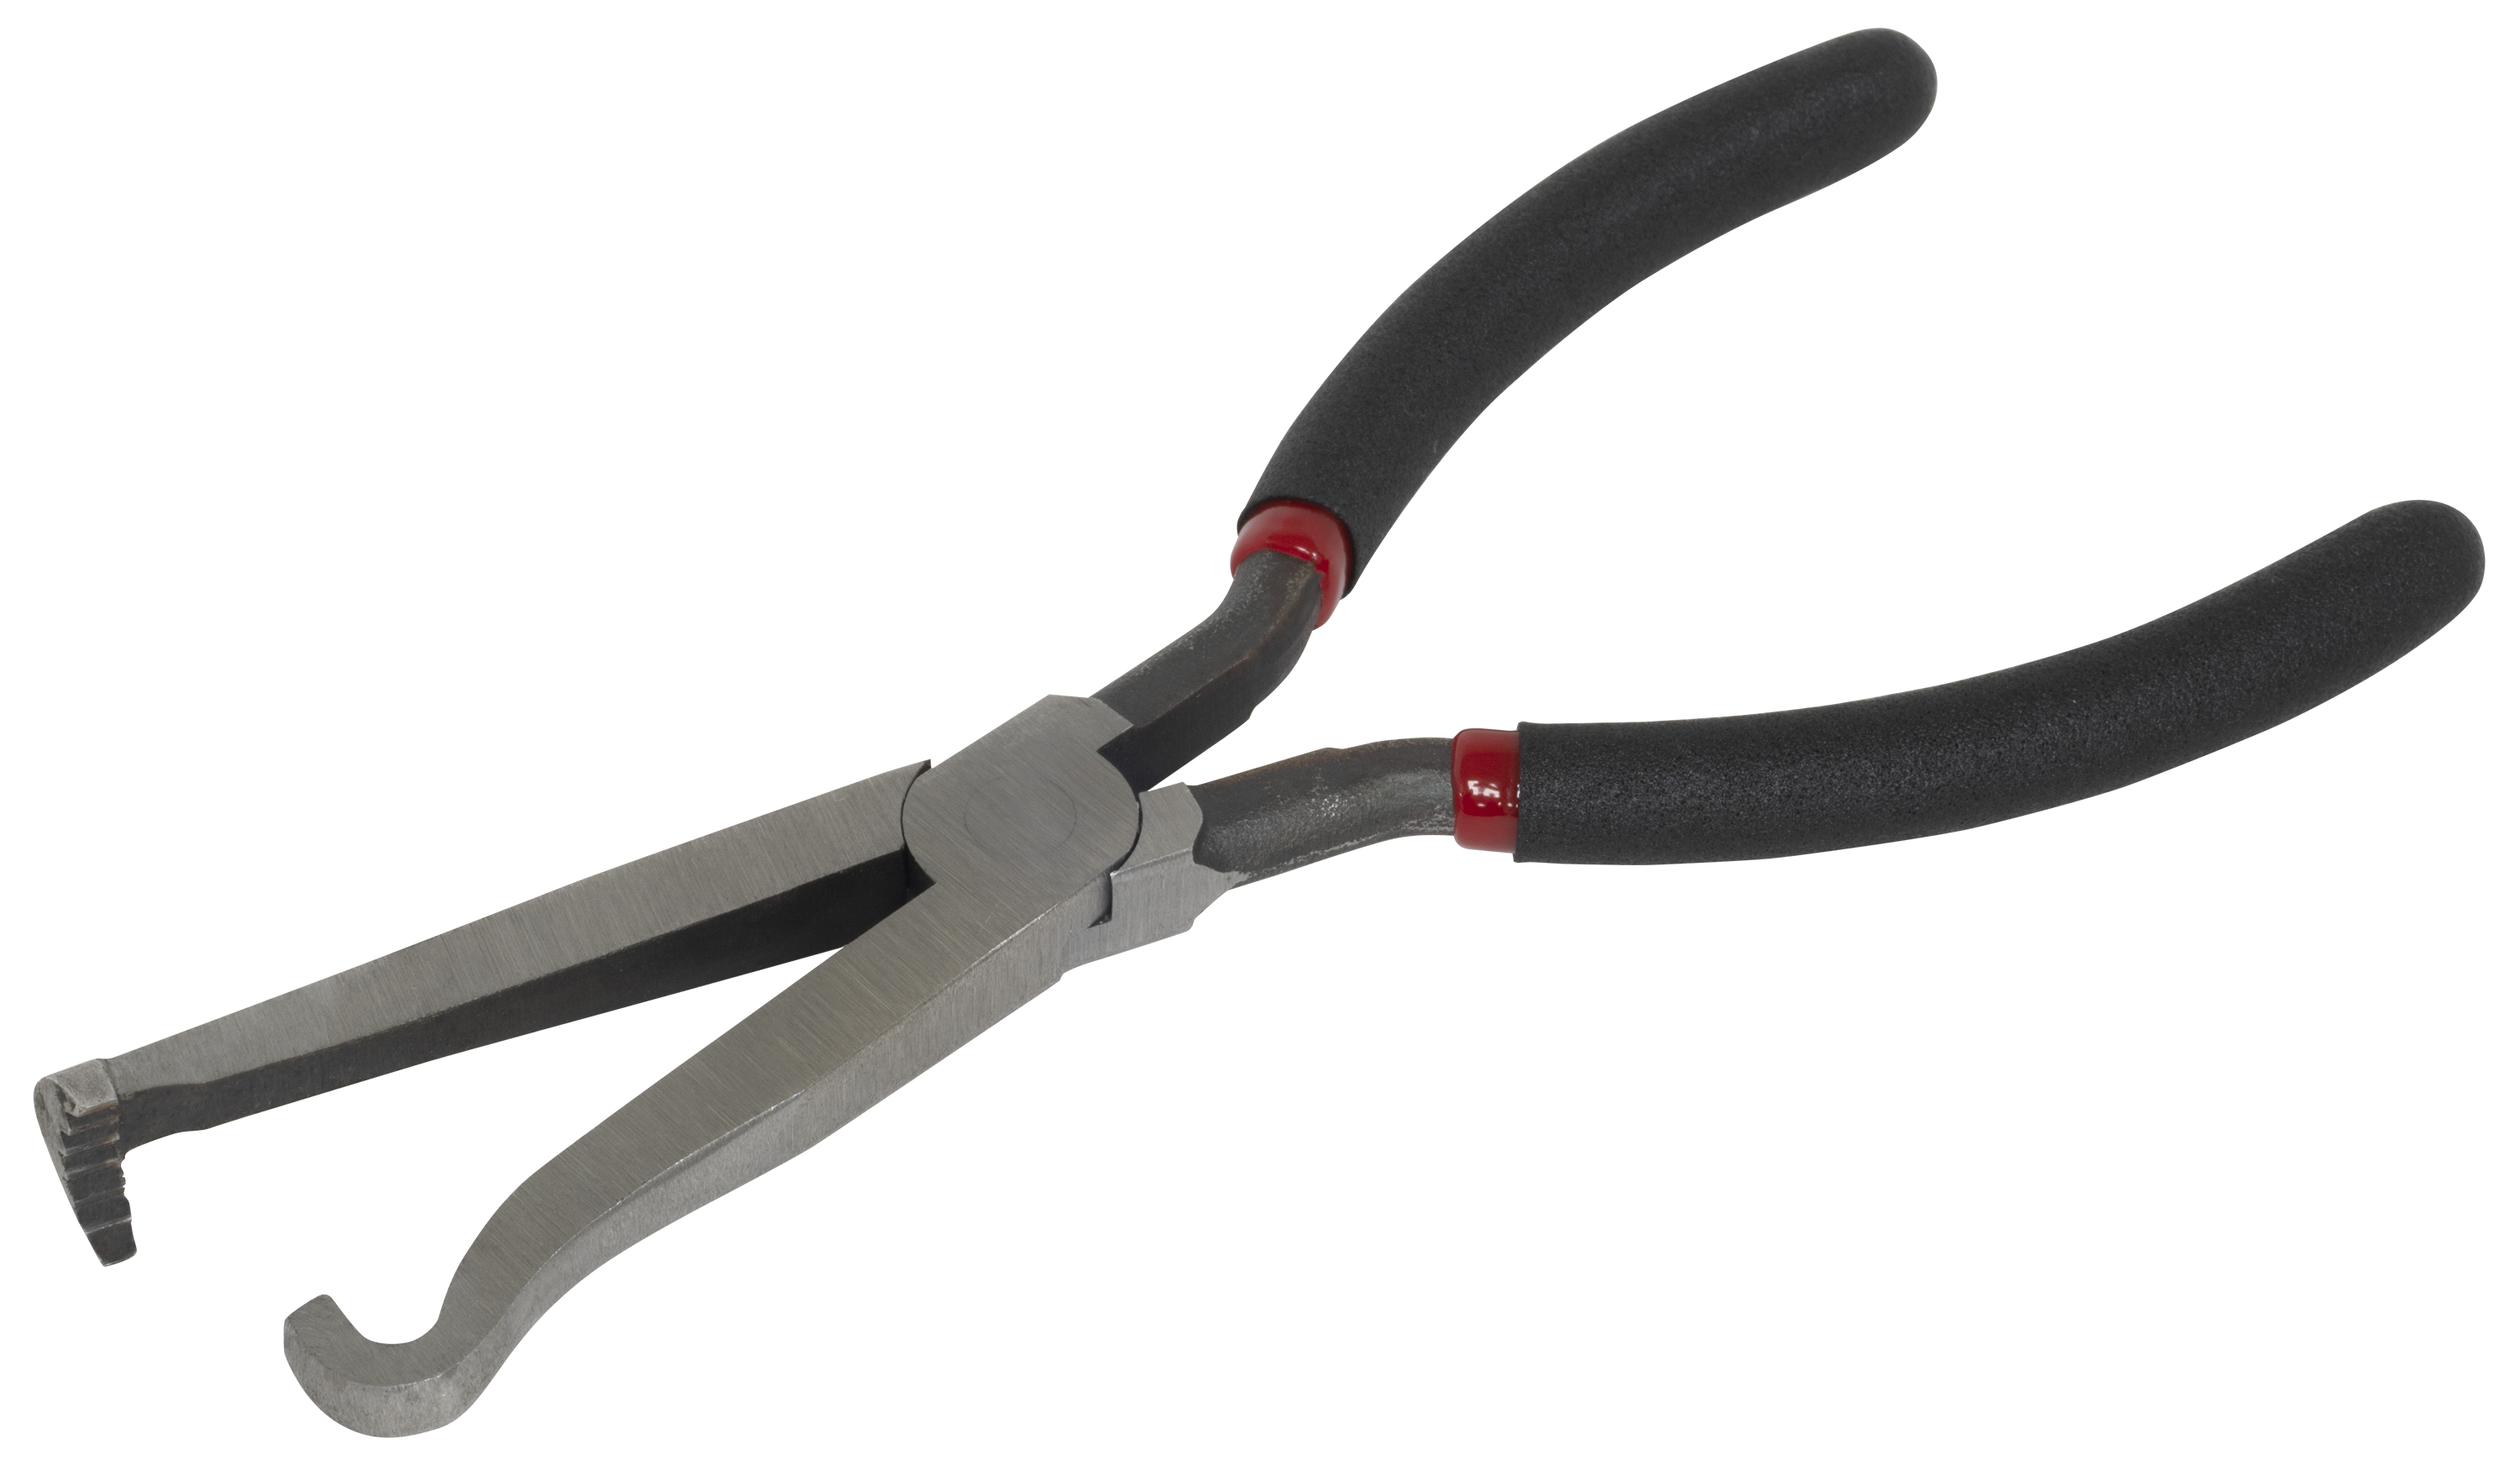 37960 Electrical Disconnect Pliers